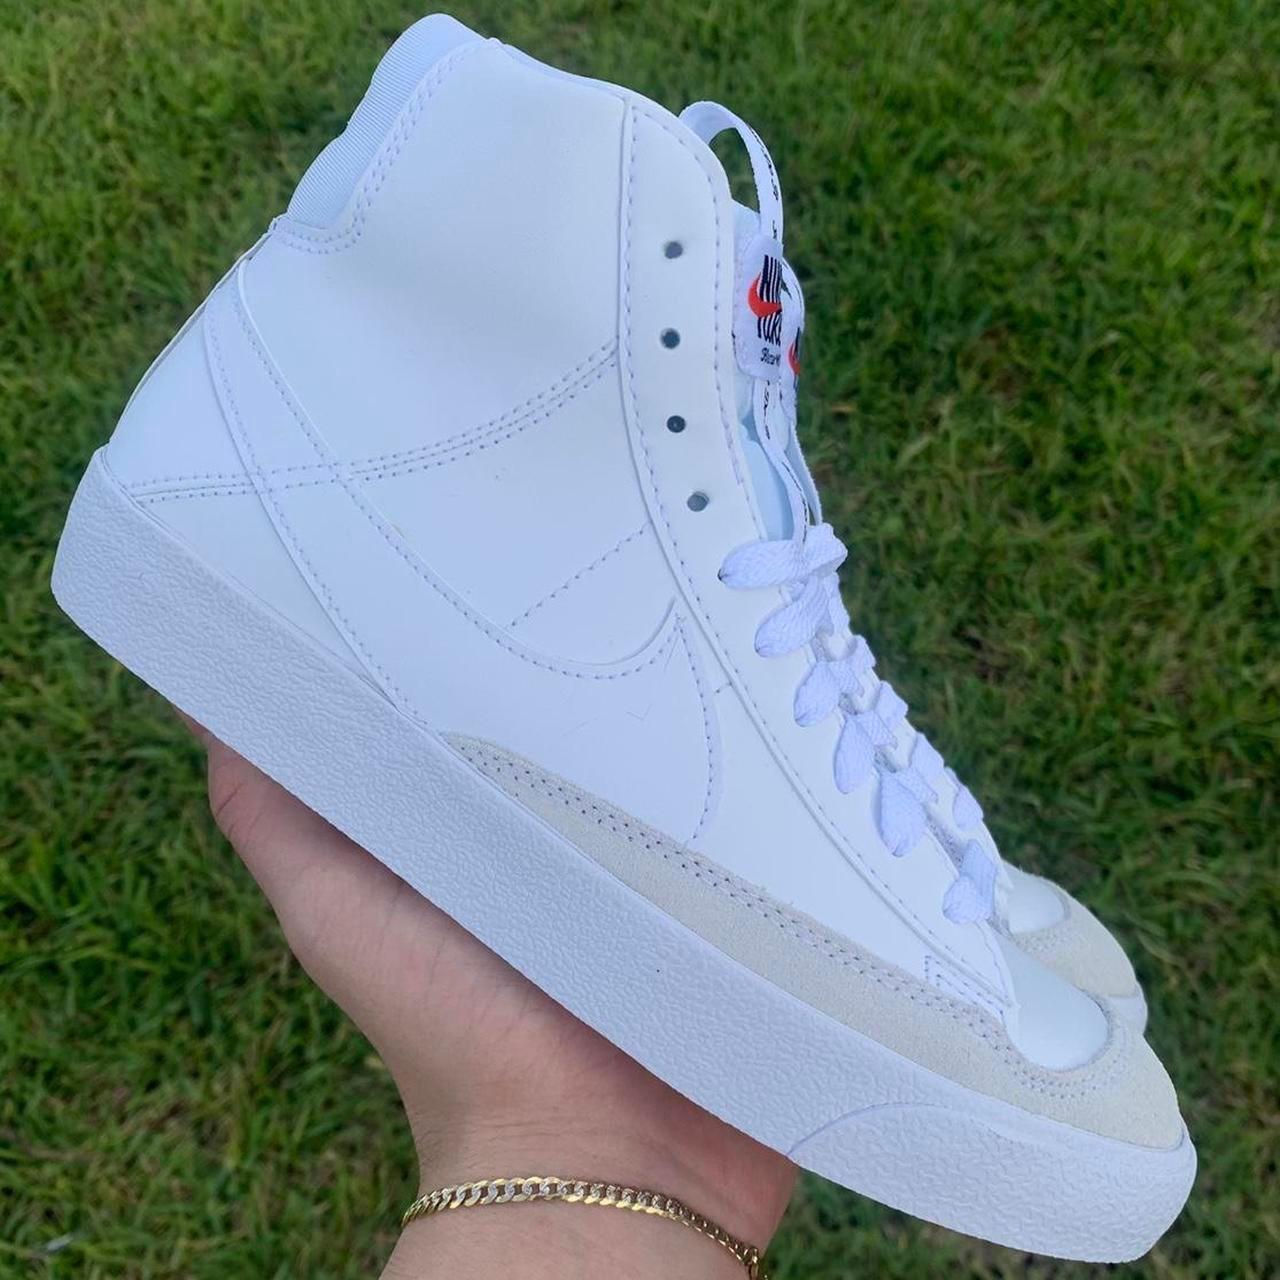 Product Image 1 - NEW NIKE BLAZER MID WHITE

Condition: